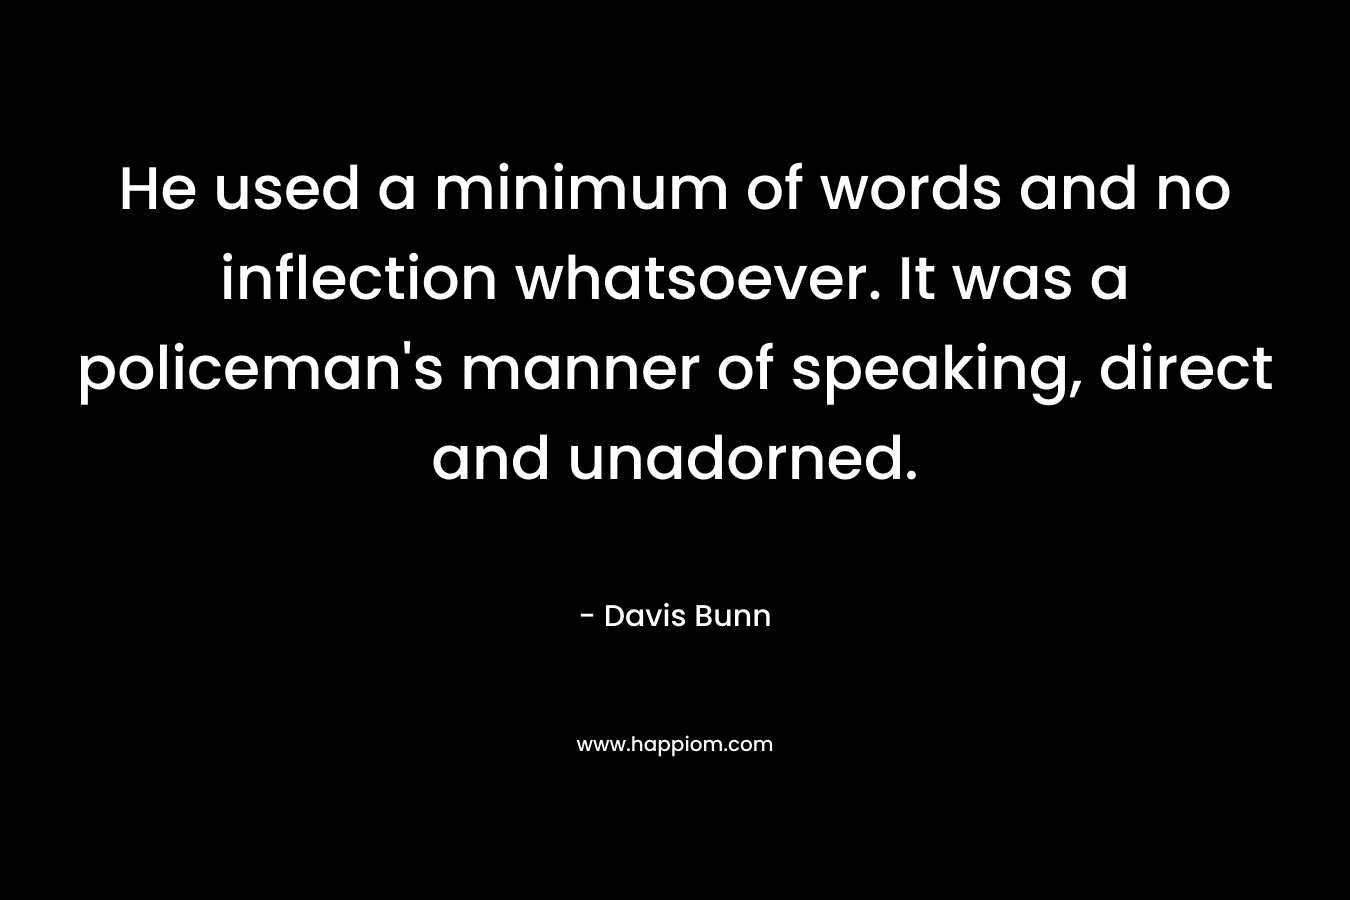 He used a minimum of words and no inflection whatsoever. It was a policeman’s manner of speaking, direct and unadorned. – Davis Bunn